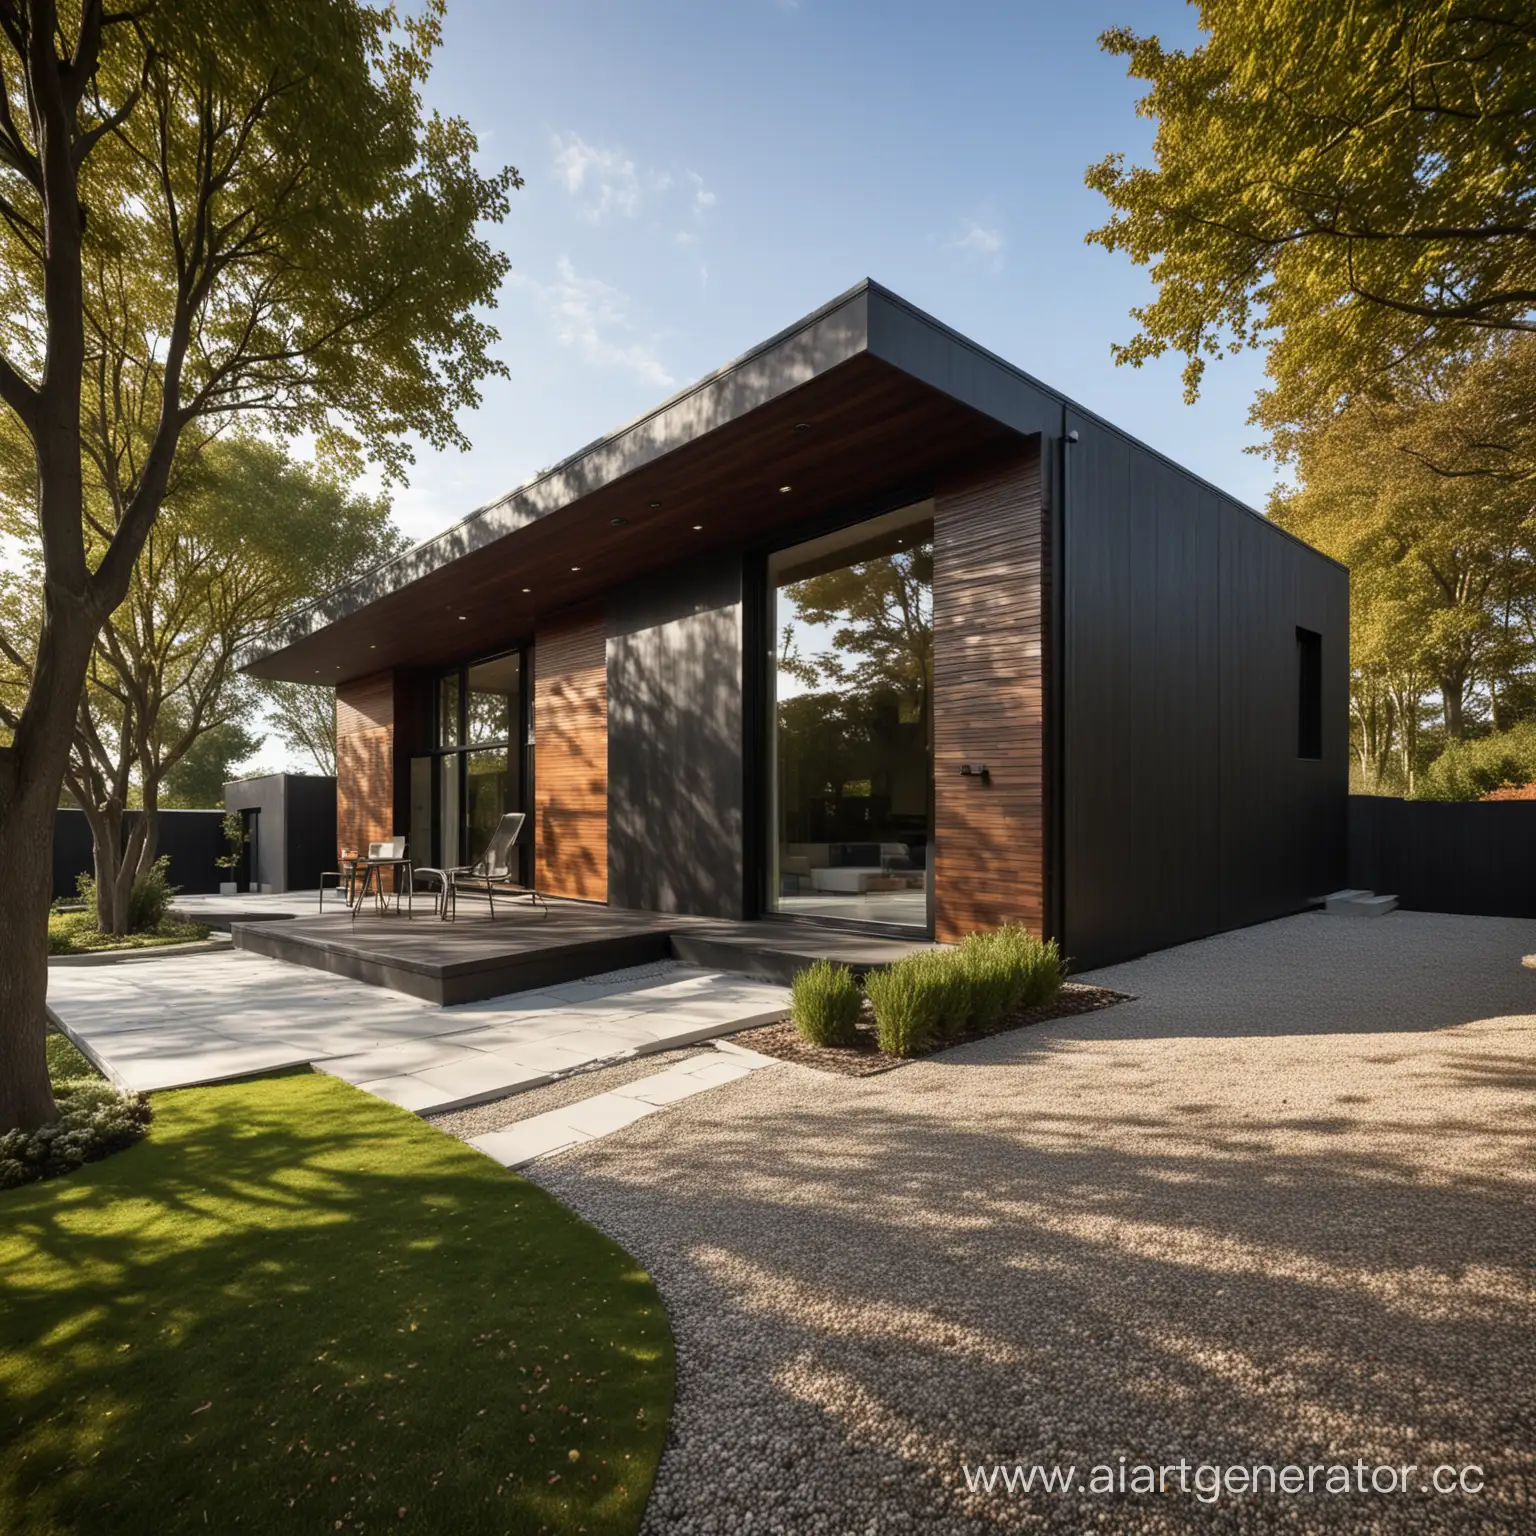 Contemporary-OneStorey-House-with-Flat-Roof-and-Dark-Wood-Facade